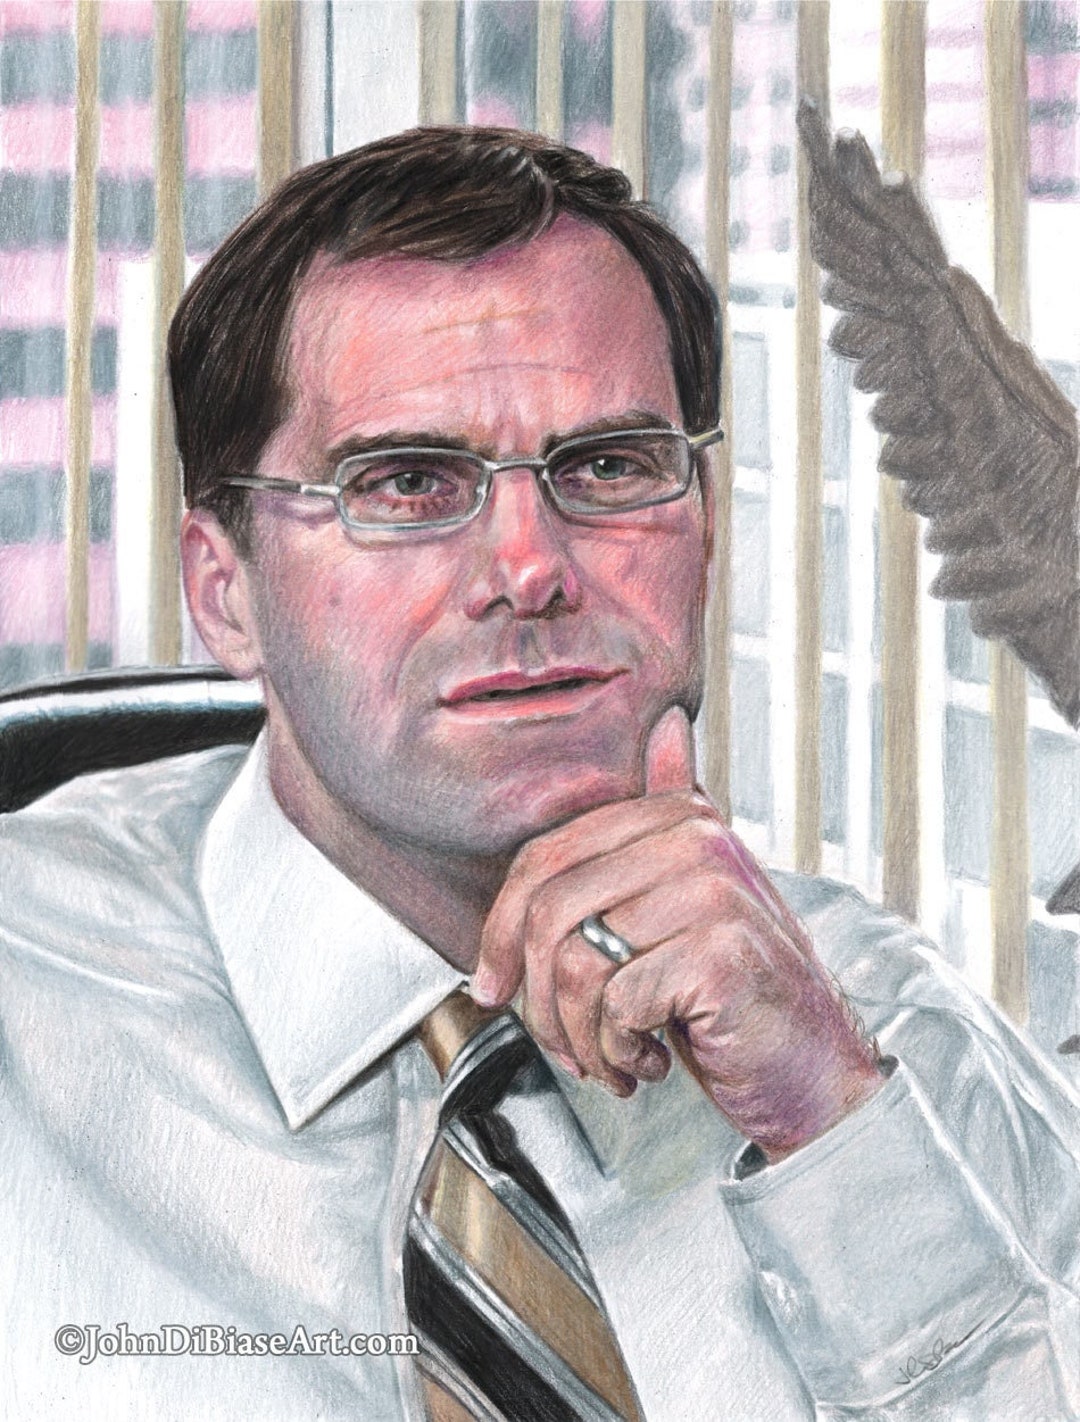 David Wallace andy Buckley From the Office - Etsy